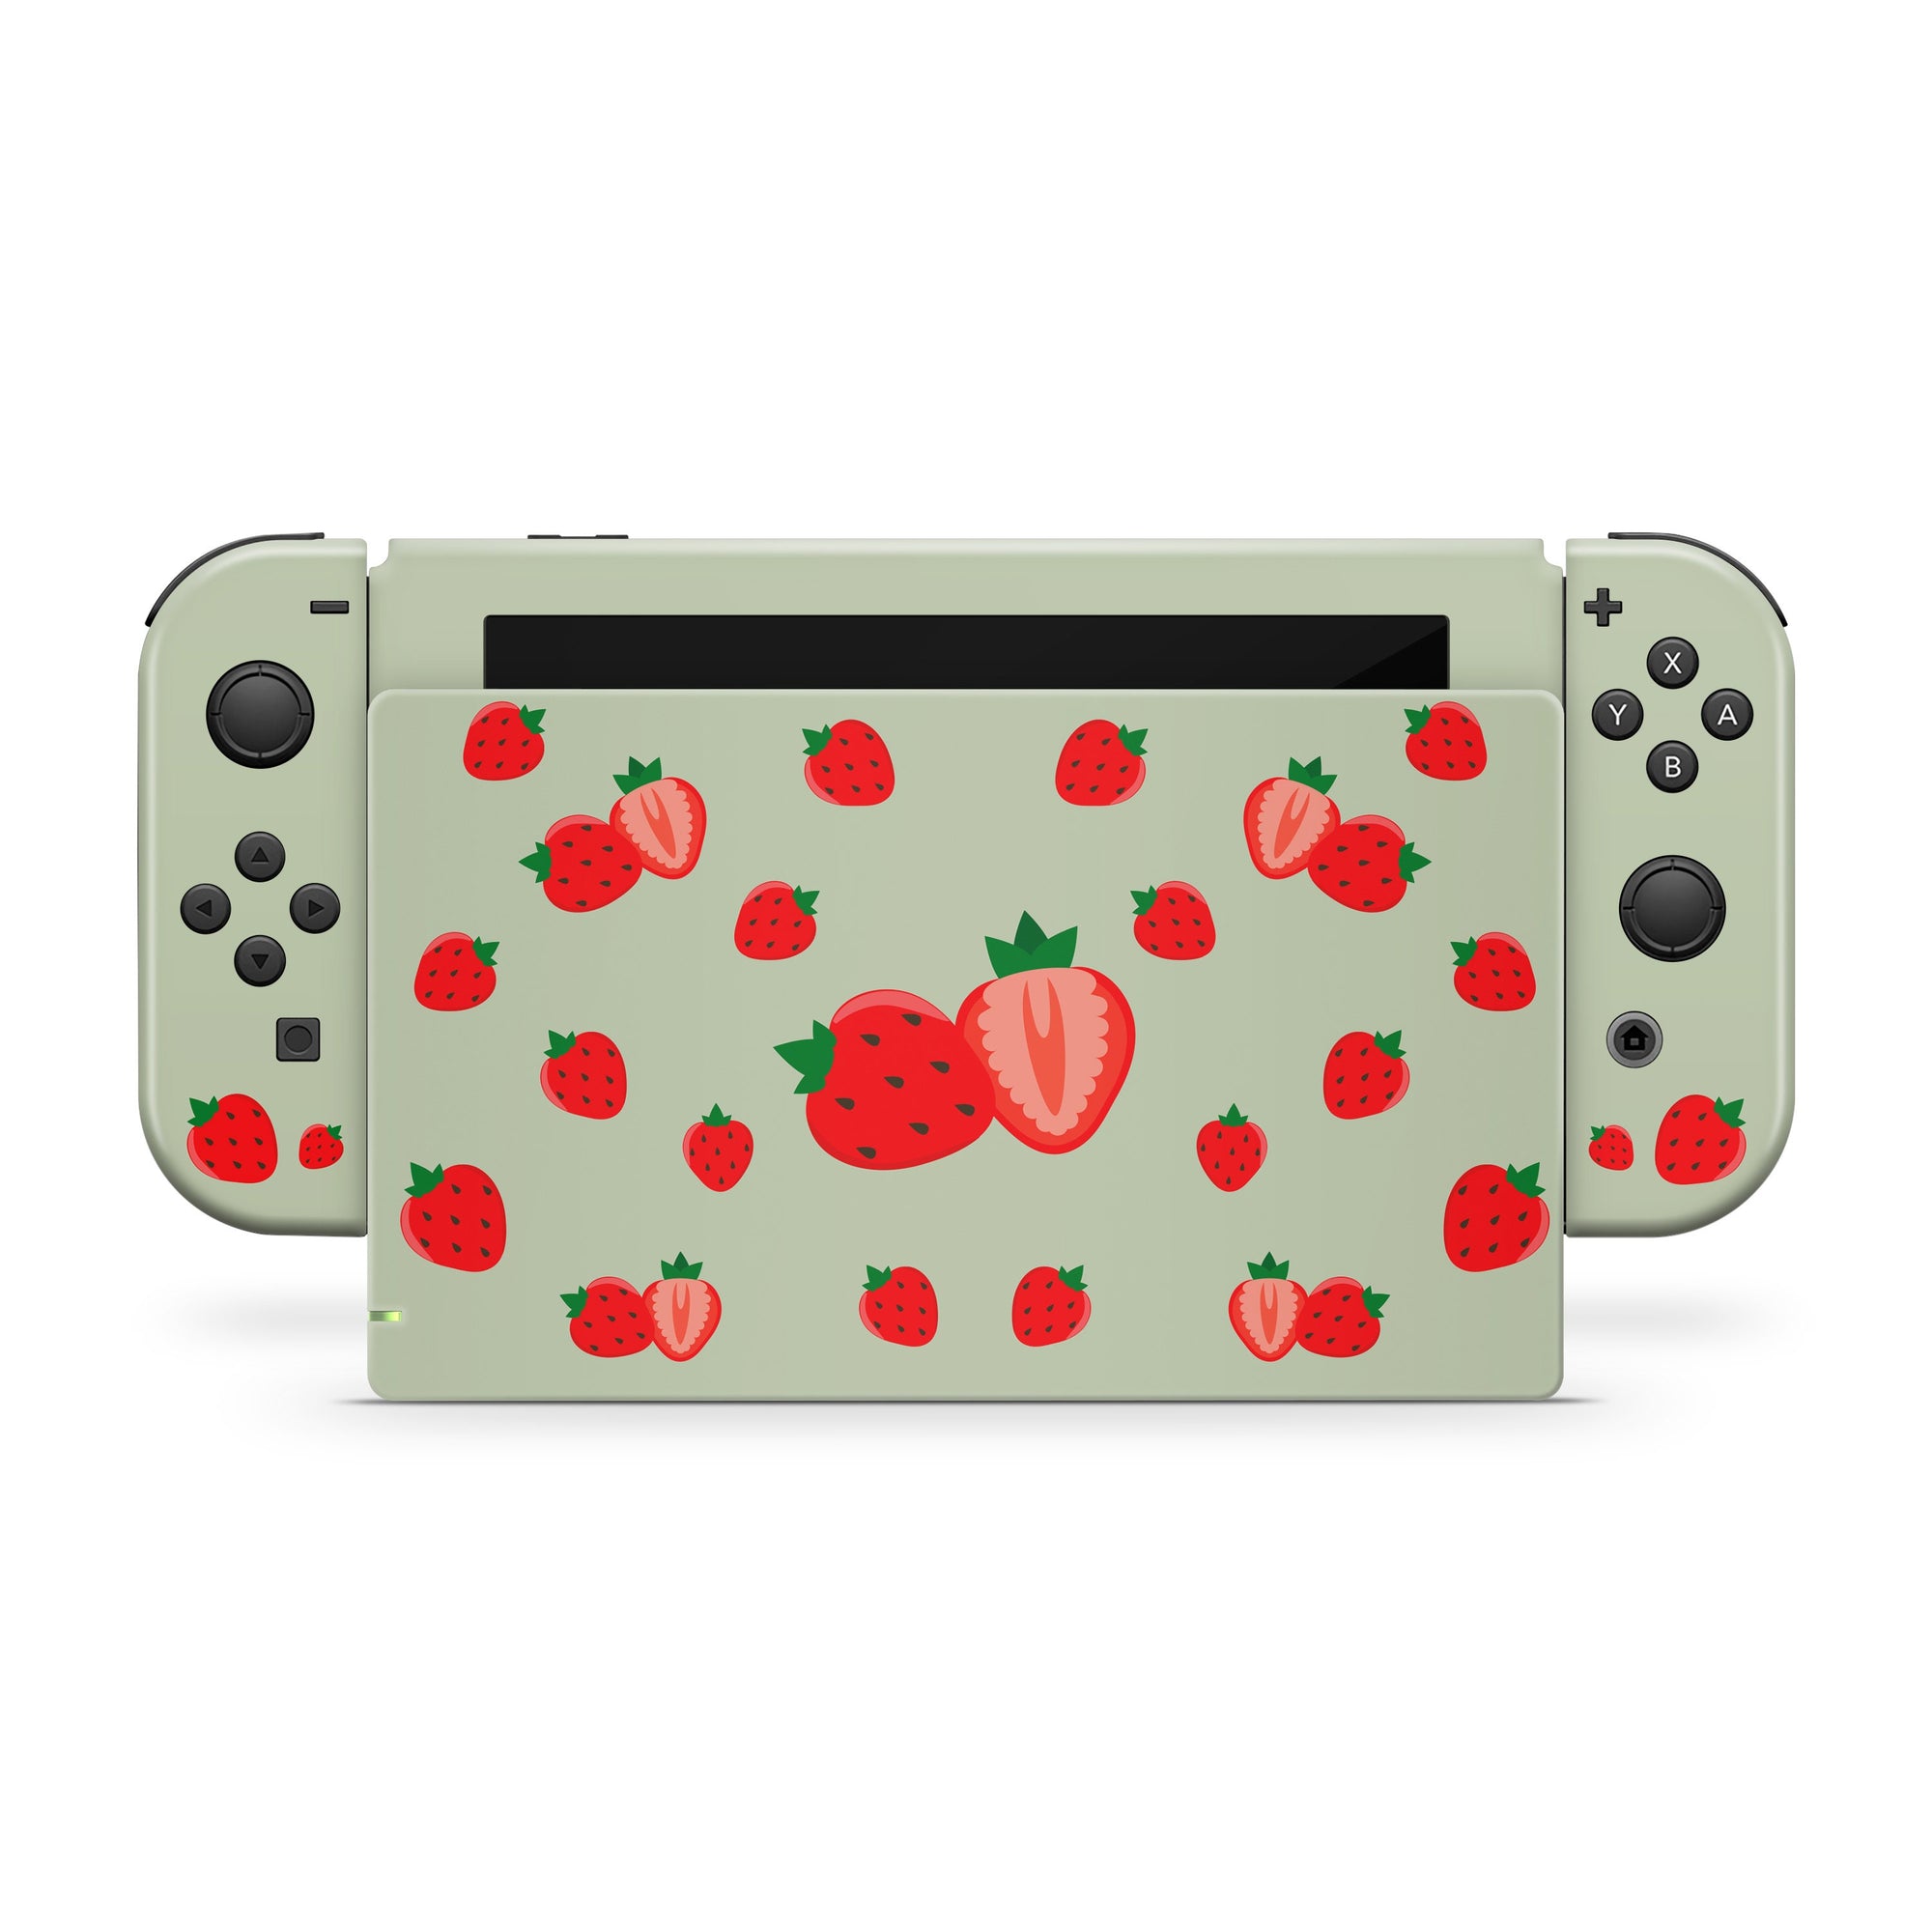 Green nintendo switches skin, Cute strawberry switch skin Full cover decal 3m